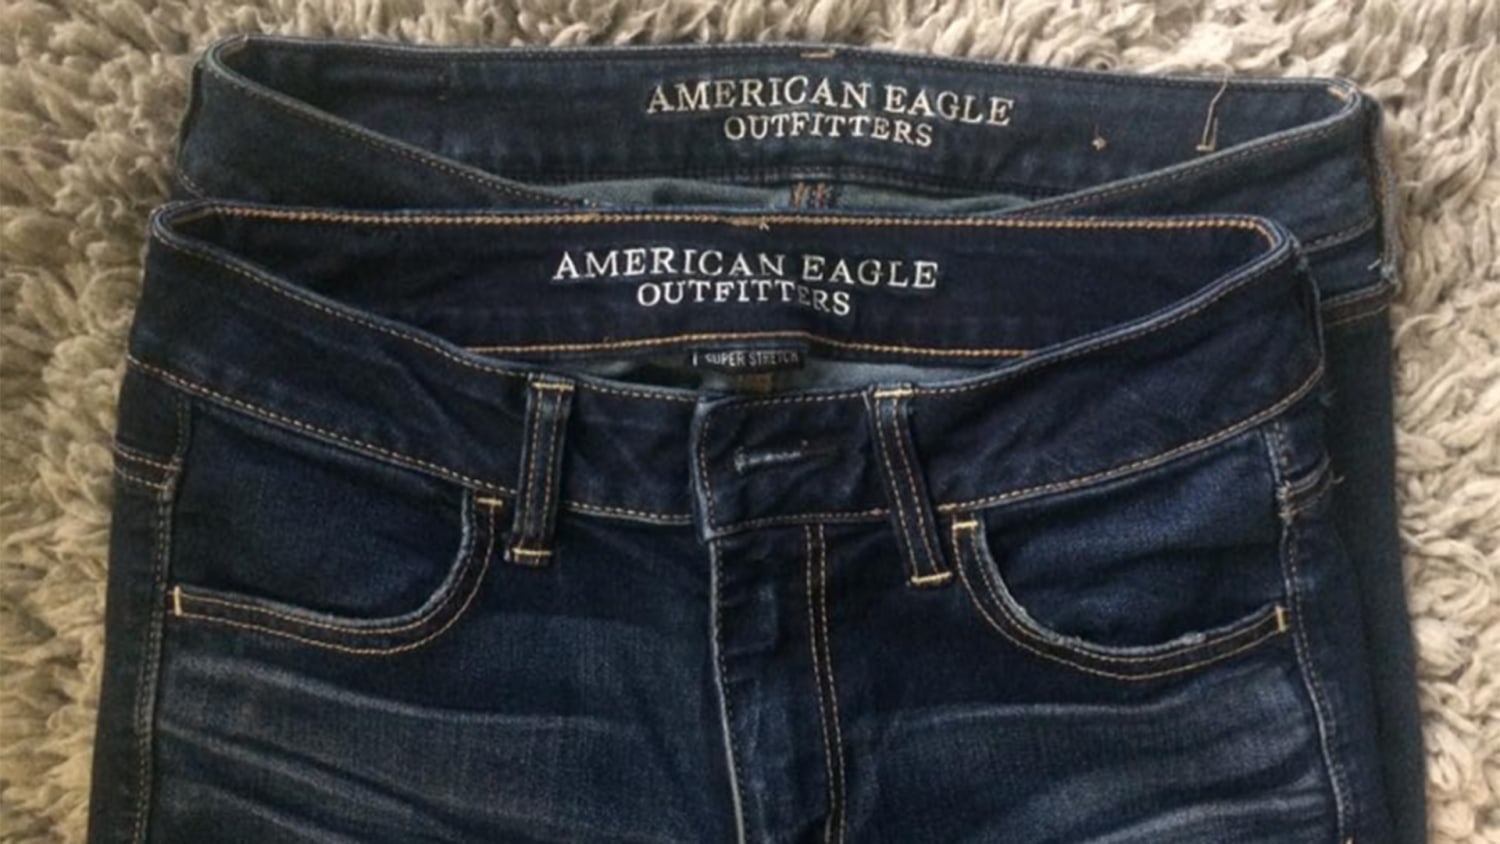 https://media-cldnry.s-nbcnews.com/image/upload/t_fit-1500w,f_auto,q_auto:best/newscms/2017_22/1218159/american-eagle-jeans-today-tease-170531.jpg